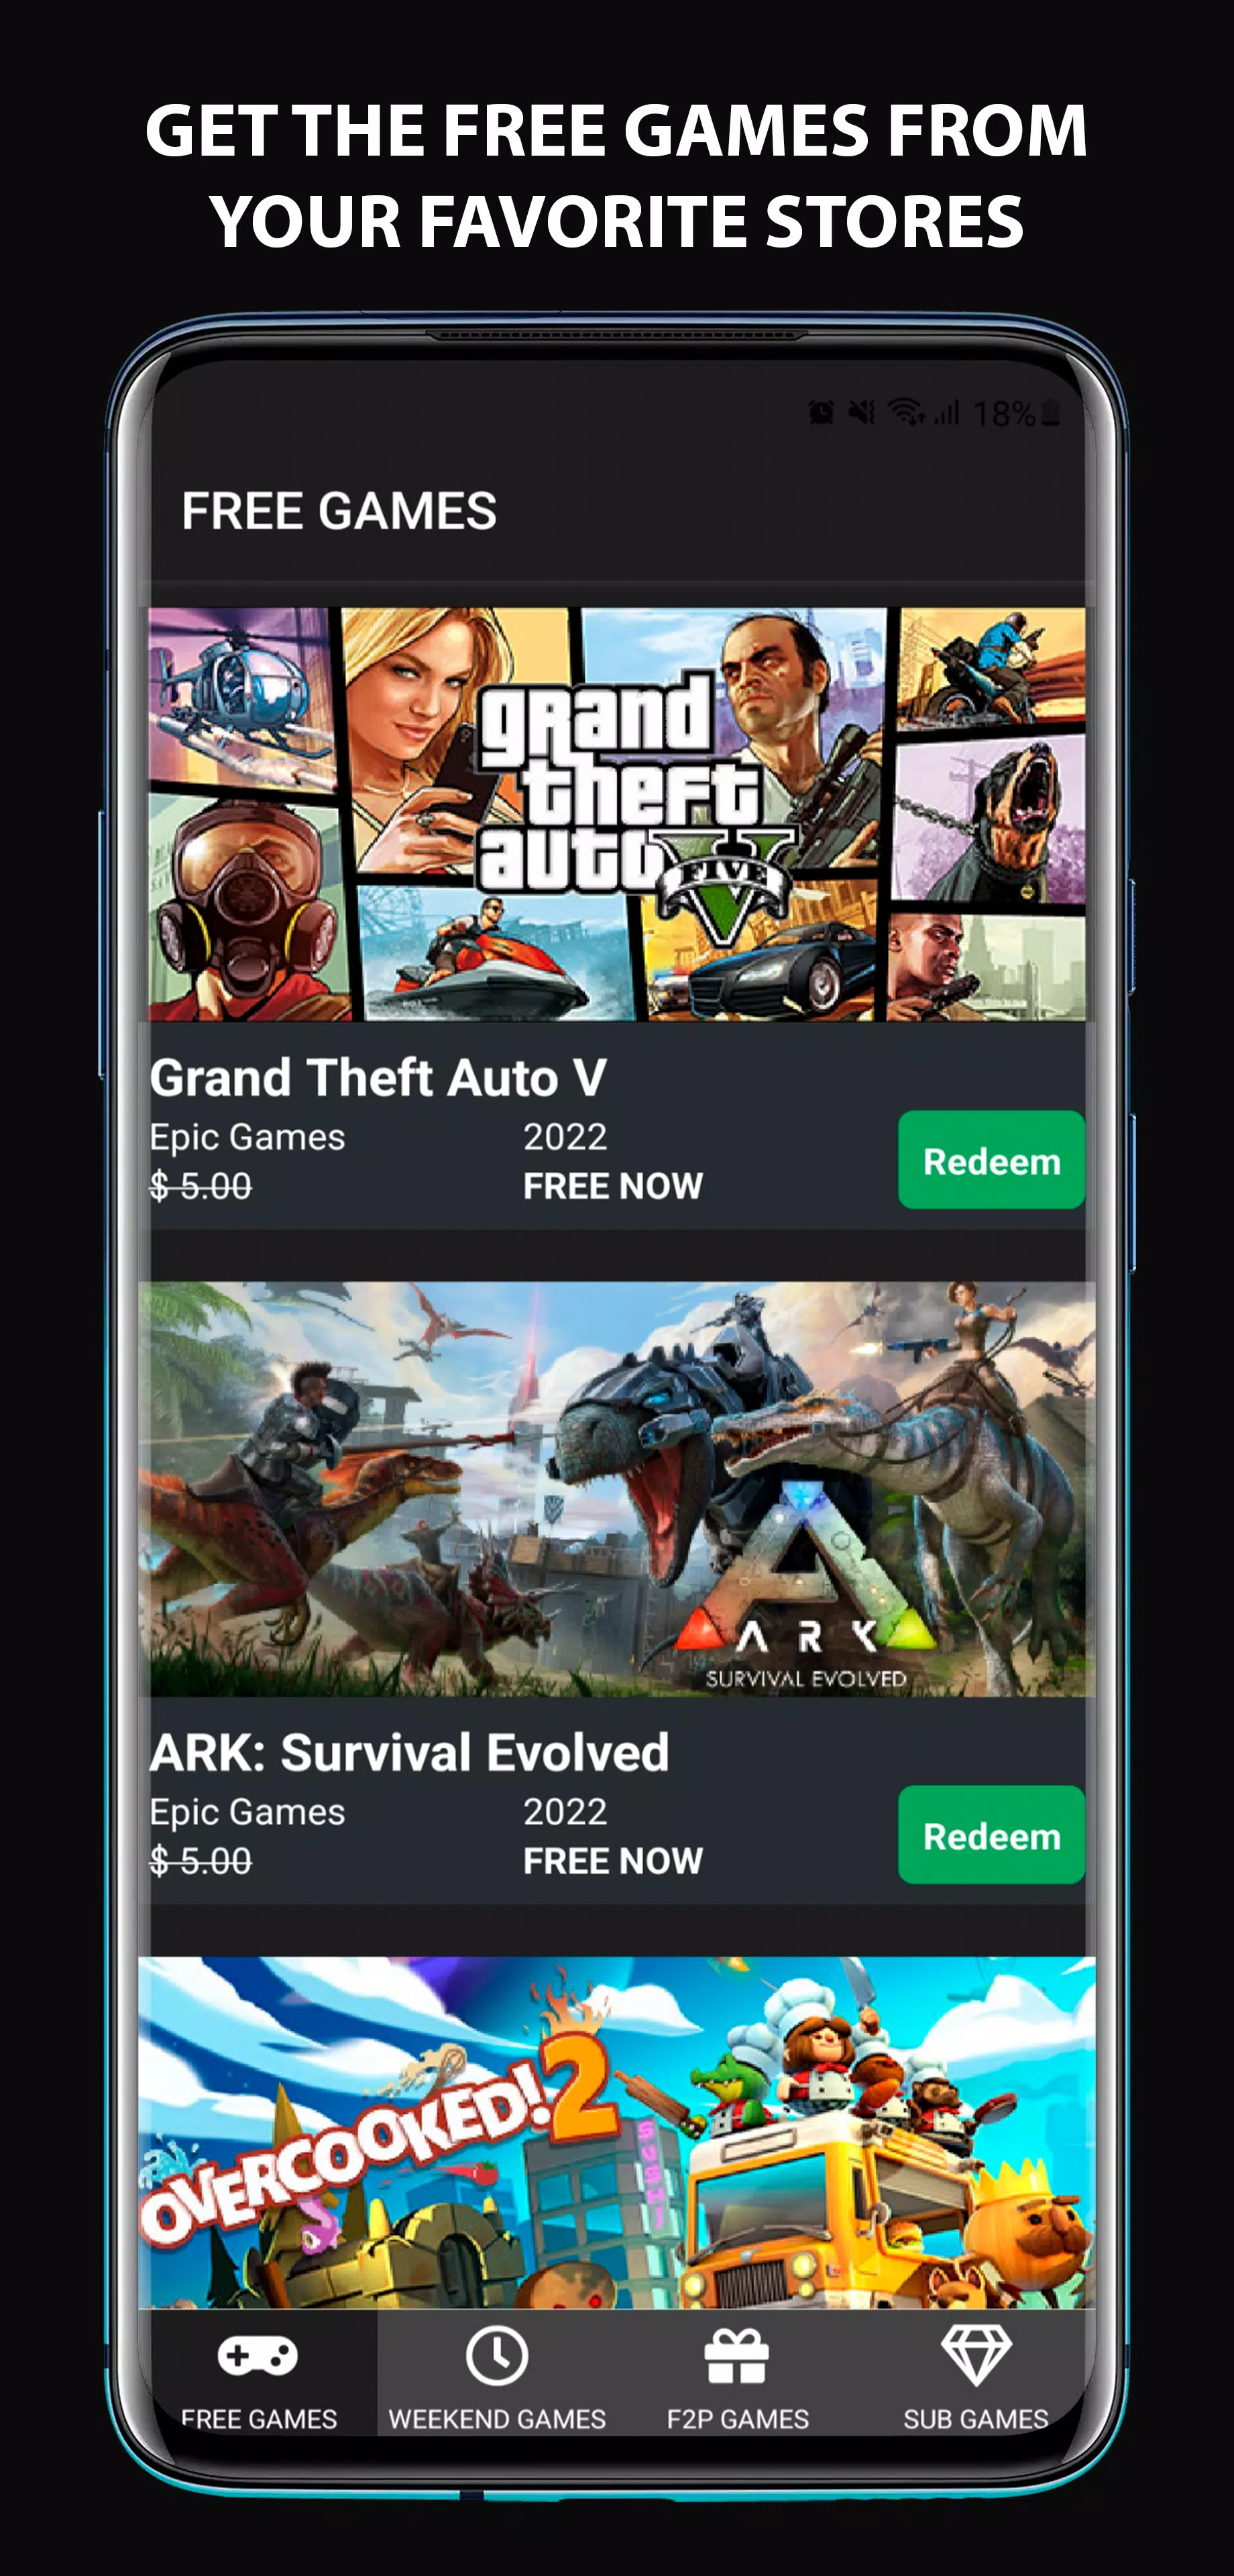 PC Games Radar for Epic Games, APK (Android App) - Free Download